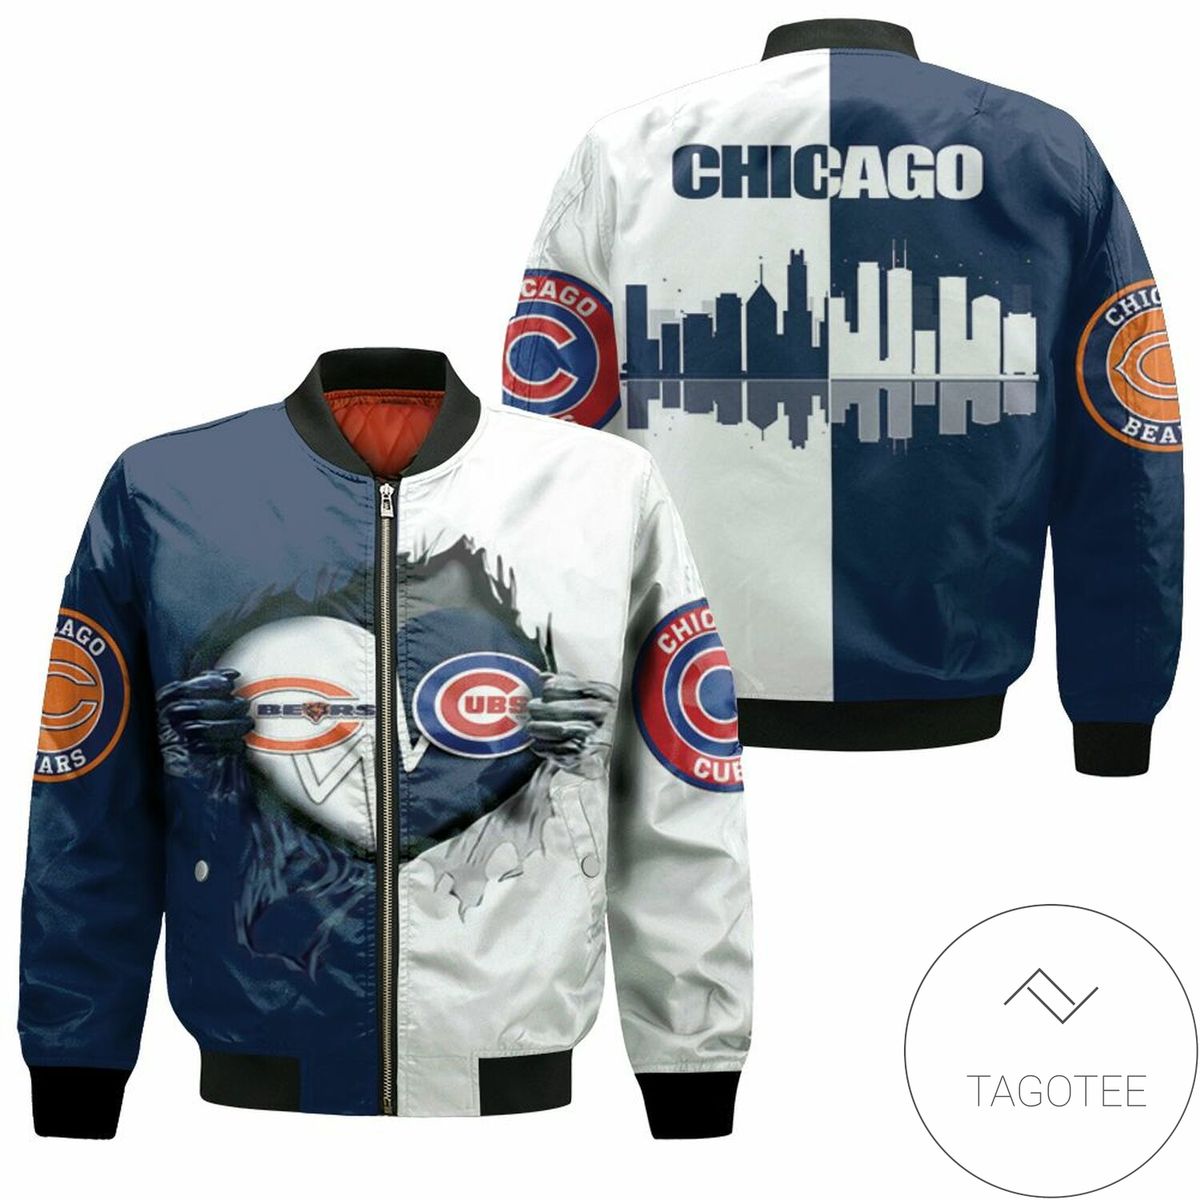 Chicago Bears Chicago Cubs Heartbeat Love Ripped 3D T Shirt Hoodie Sweater Jersey Bomber Jacket